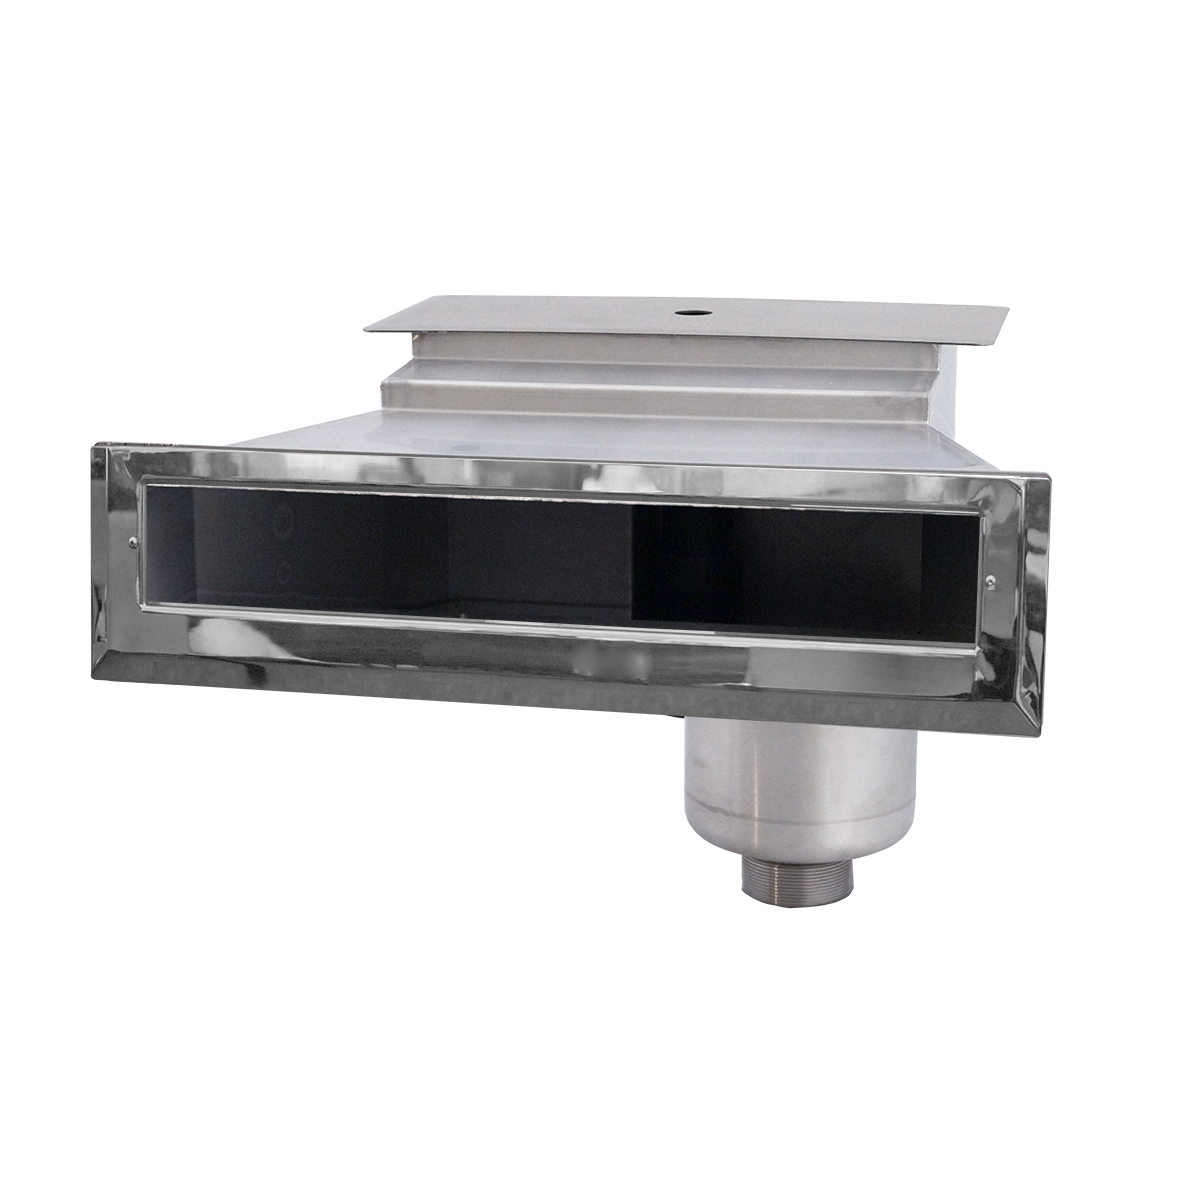 Ocean® high water level skimmer stainless steel V4A High500 for concrete, liner and build-up pools with lid, stainless steel basket, suction width 460 mm, overflow d50, connection IG2" and AG 2 ½", incl. bracket for niveau sensor Ocean® high water level skimmer stainless steel V4A High500 for concrete, liner and build-up pools with lid, stainless steel basket, suction width 460 mm, overflow d50, connection IG2" and AG 2 ½", incl. bracket for niveau sensor